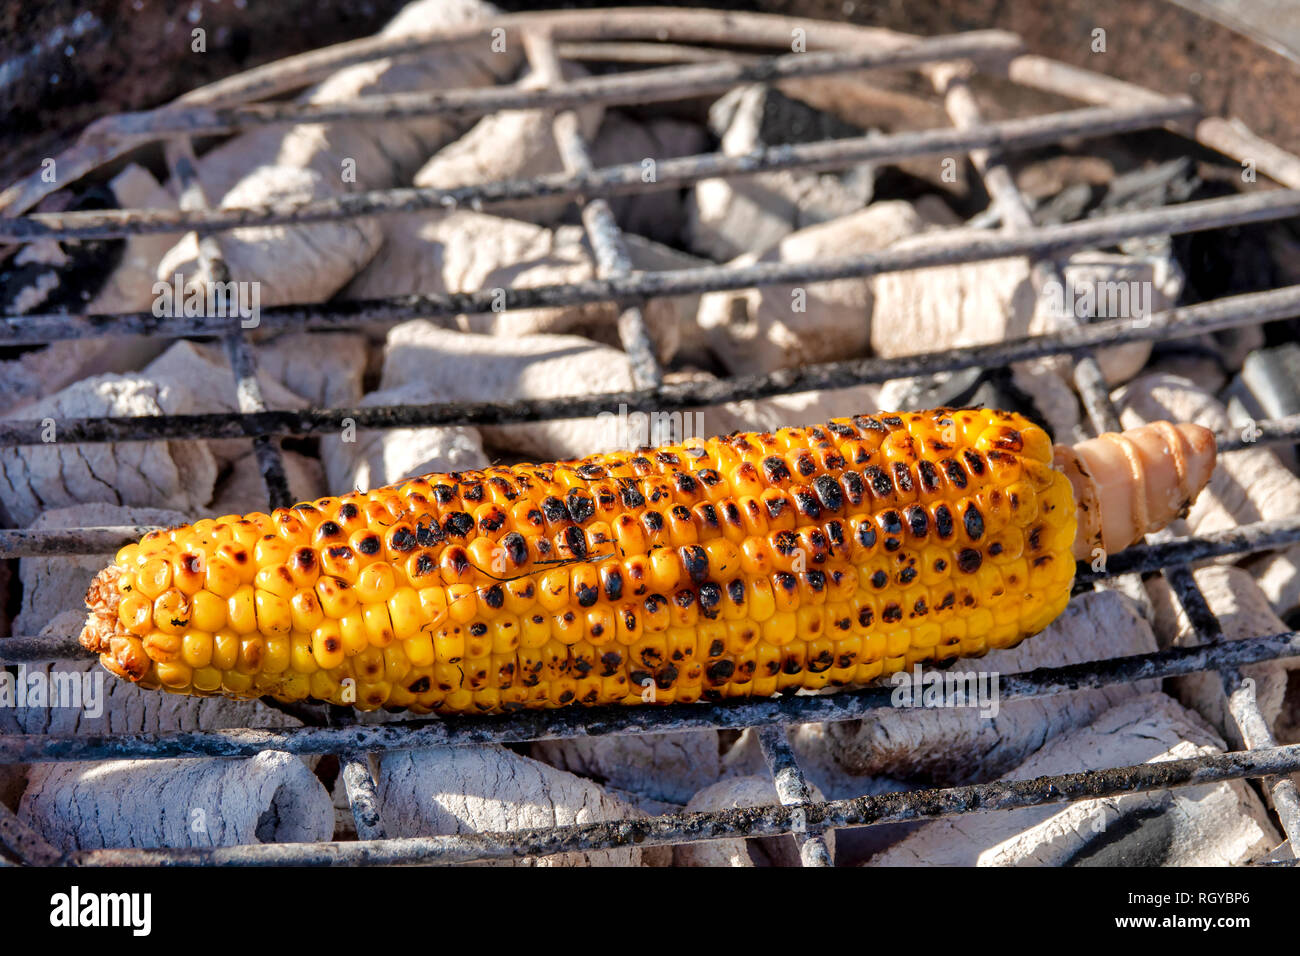 Corn on the cob cooked on hot coals Stock Photo